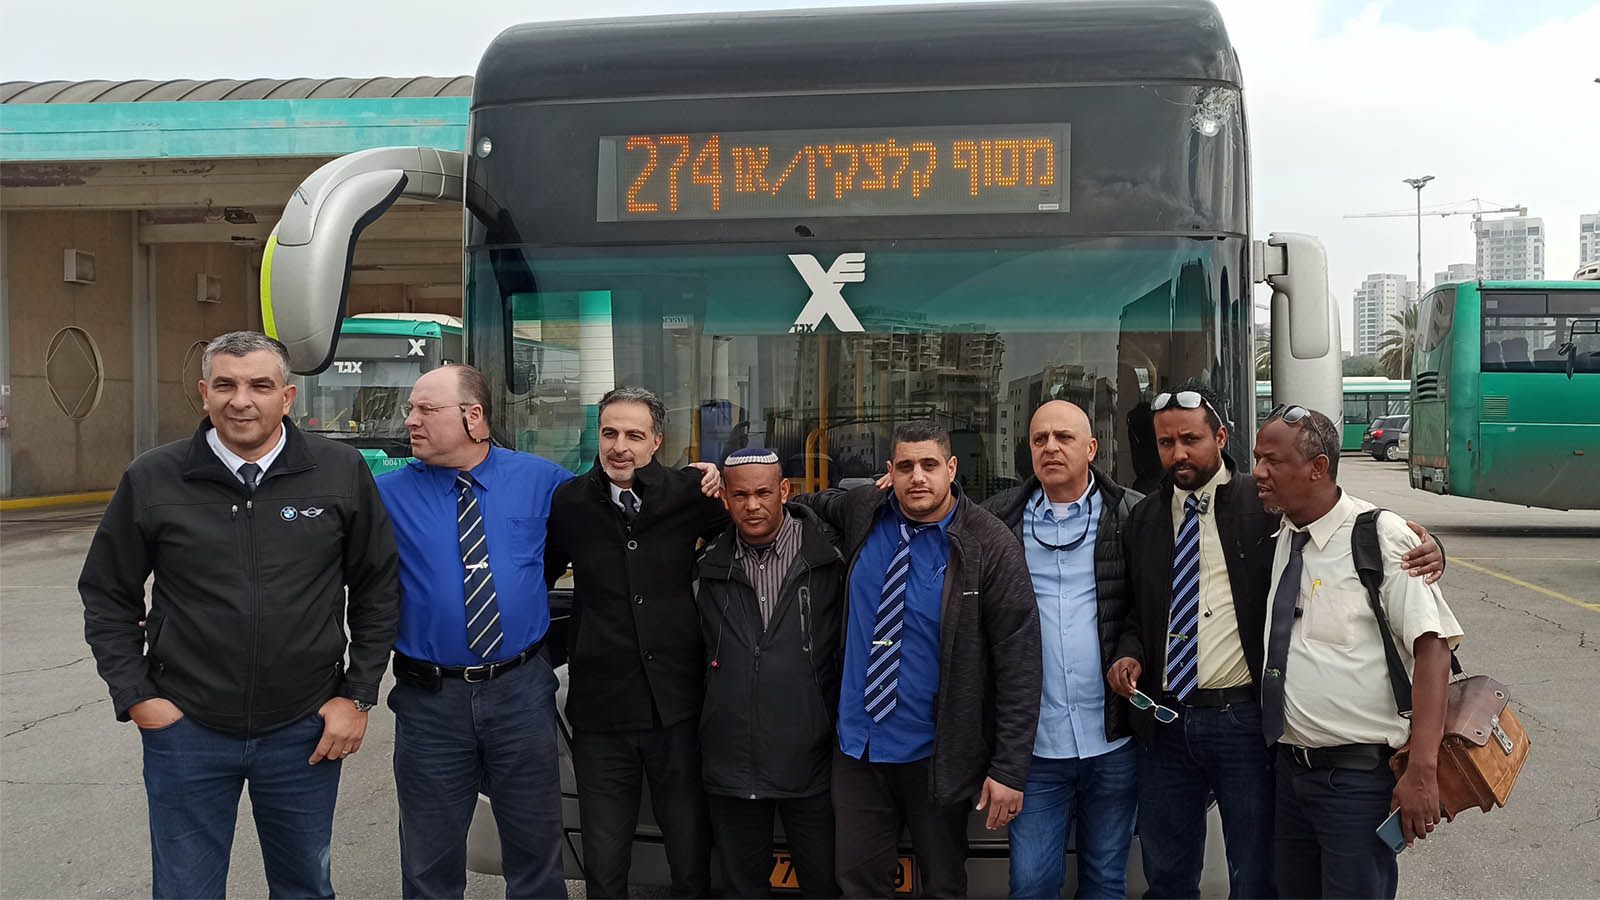 Drivers of Egged in Rehovot. Center: Tovia Nagusa, the driver who was attacked (Photograph: Nizzan Tzvi Cohen)